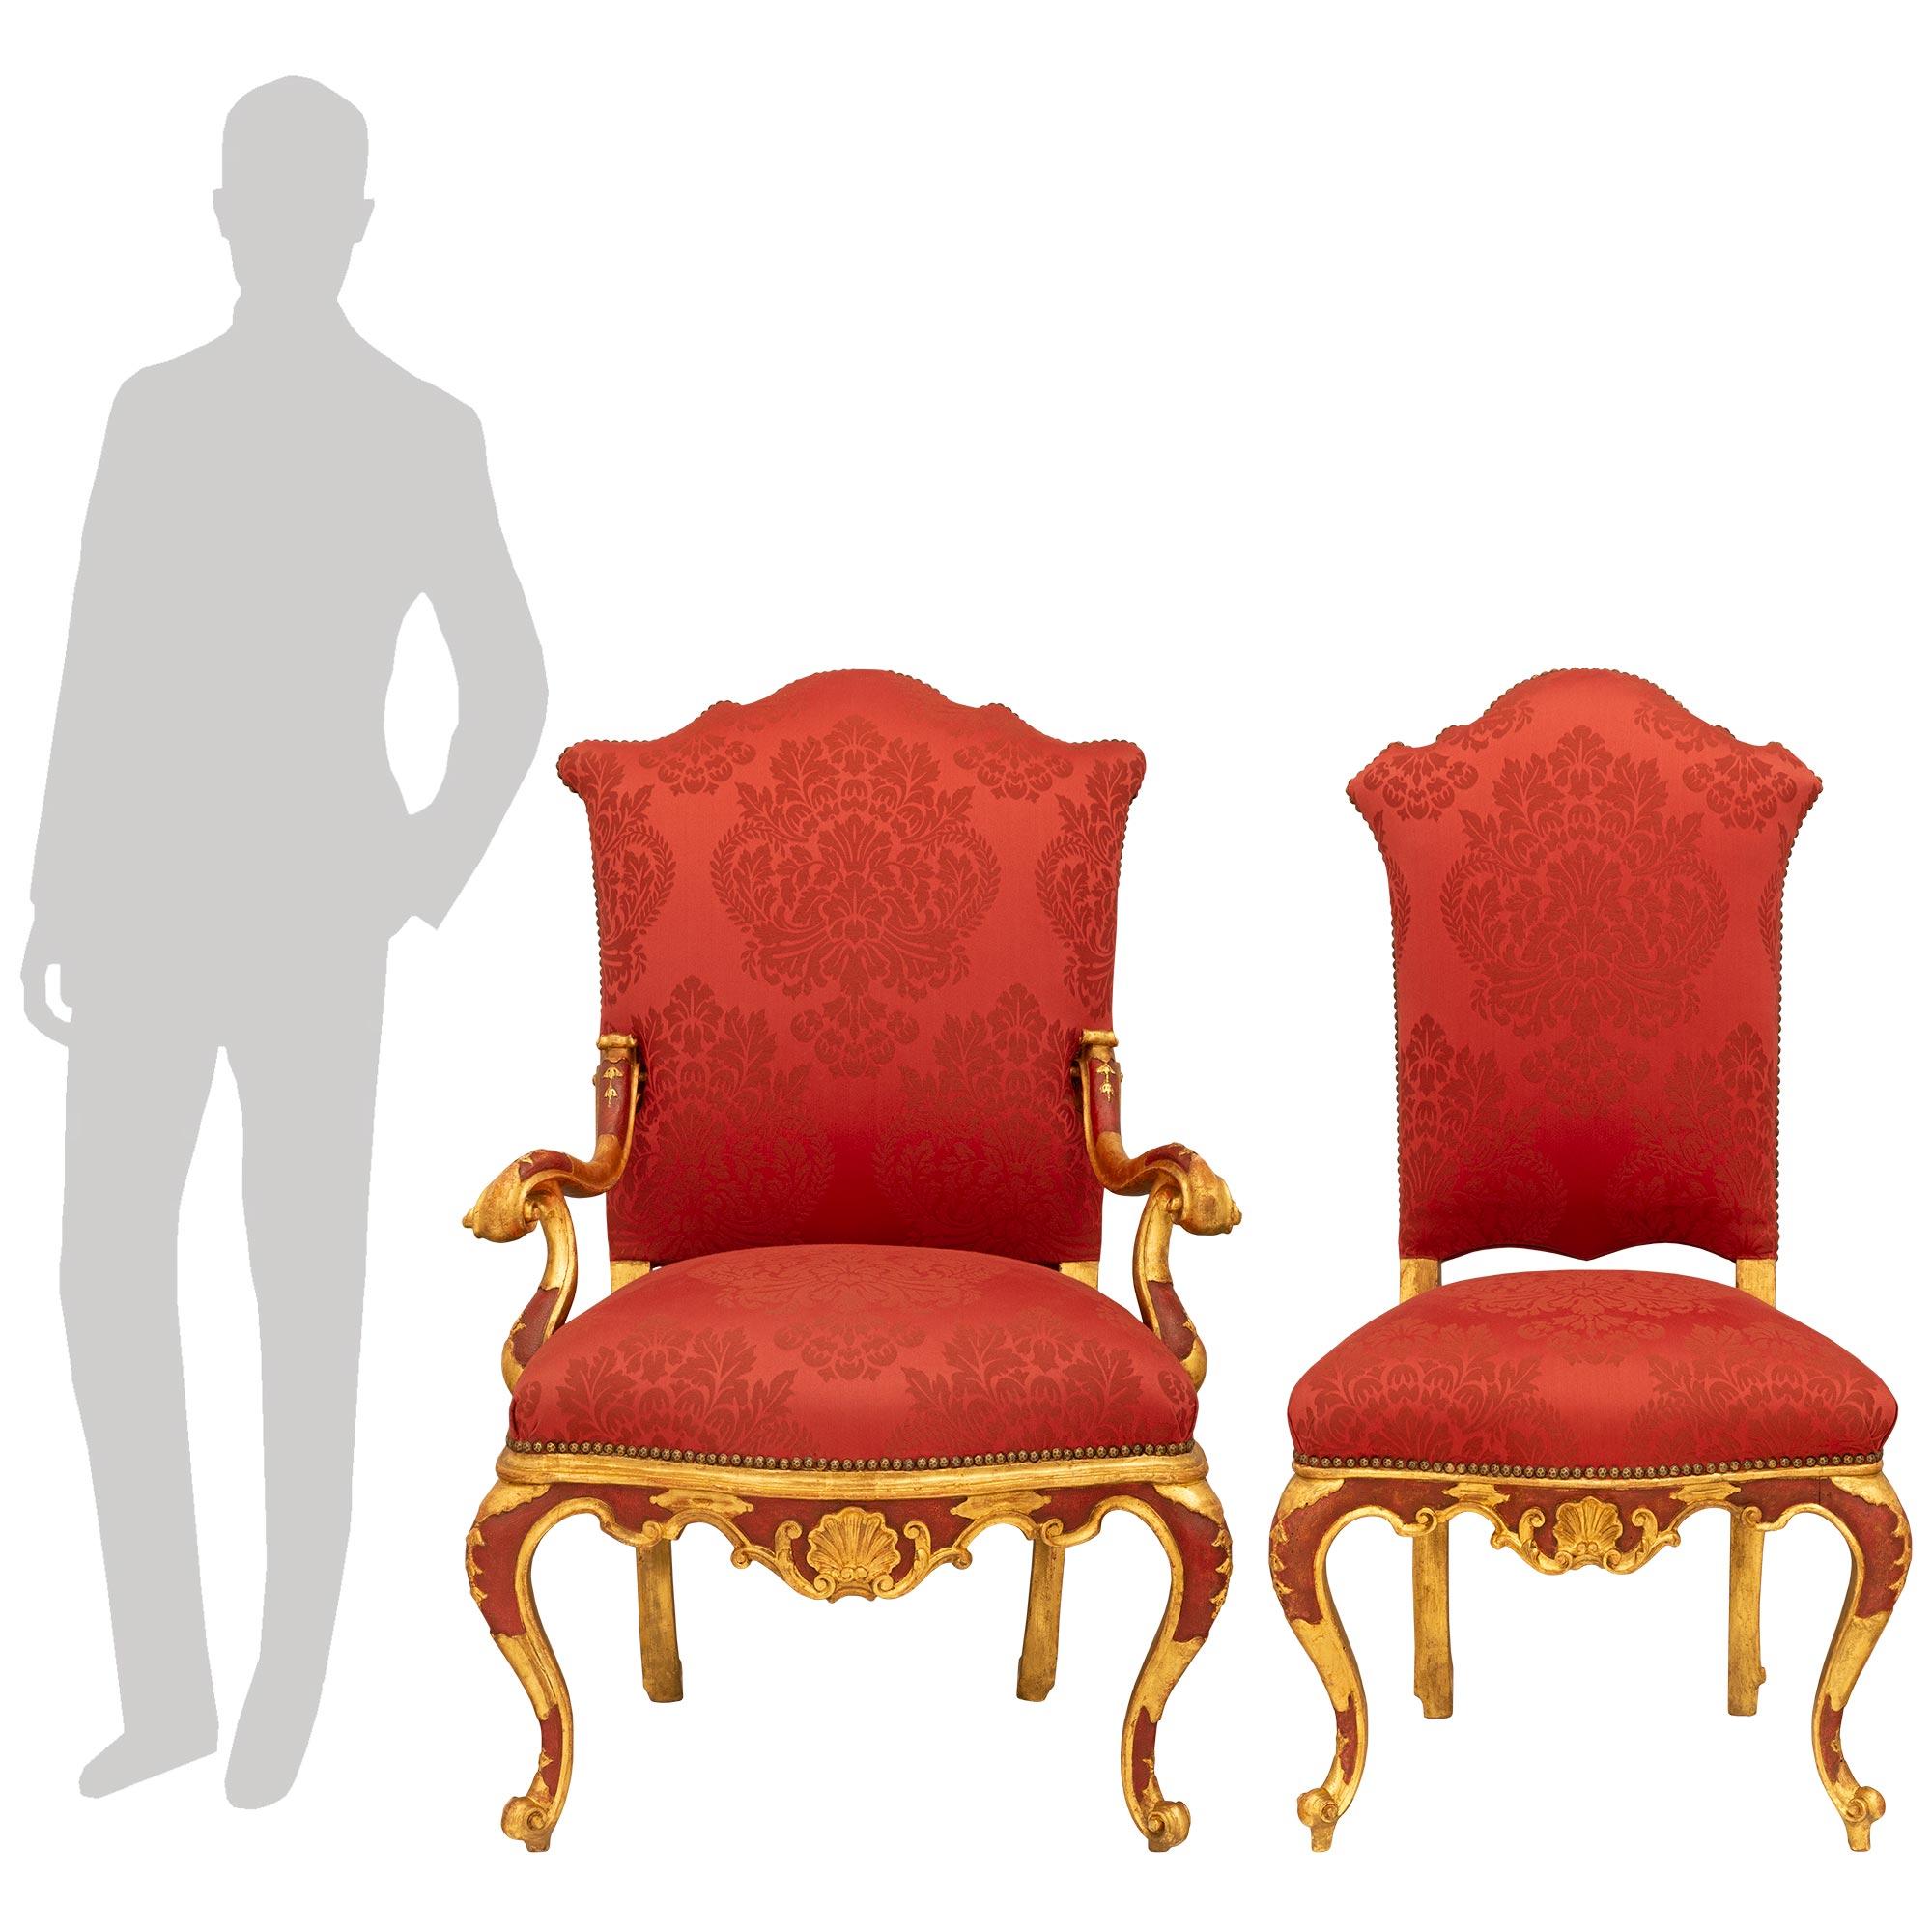 A sensational set of eight Italian mid 18th century Venetian st. red Polychrome and Giltwood dining chairs. The set of six side chairs and two armchairs are elegantly raised on cabriole legs decorated by a central gilt crest below a cartouche with